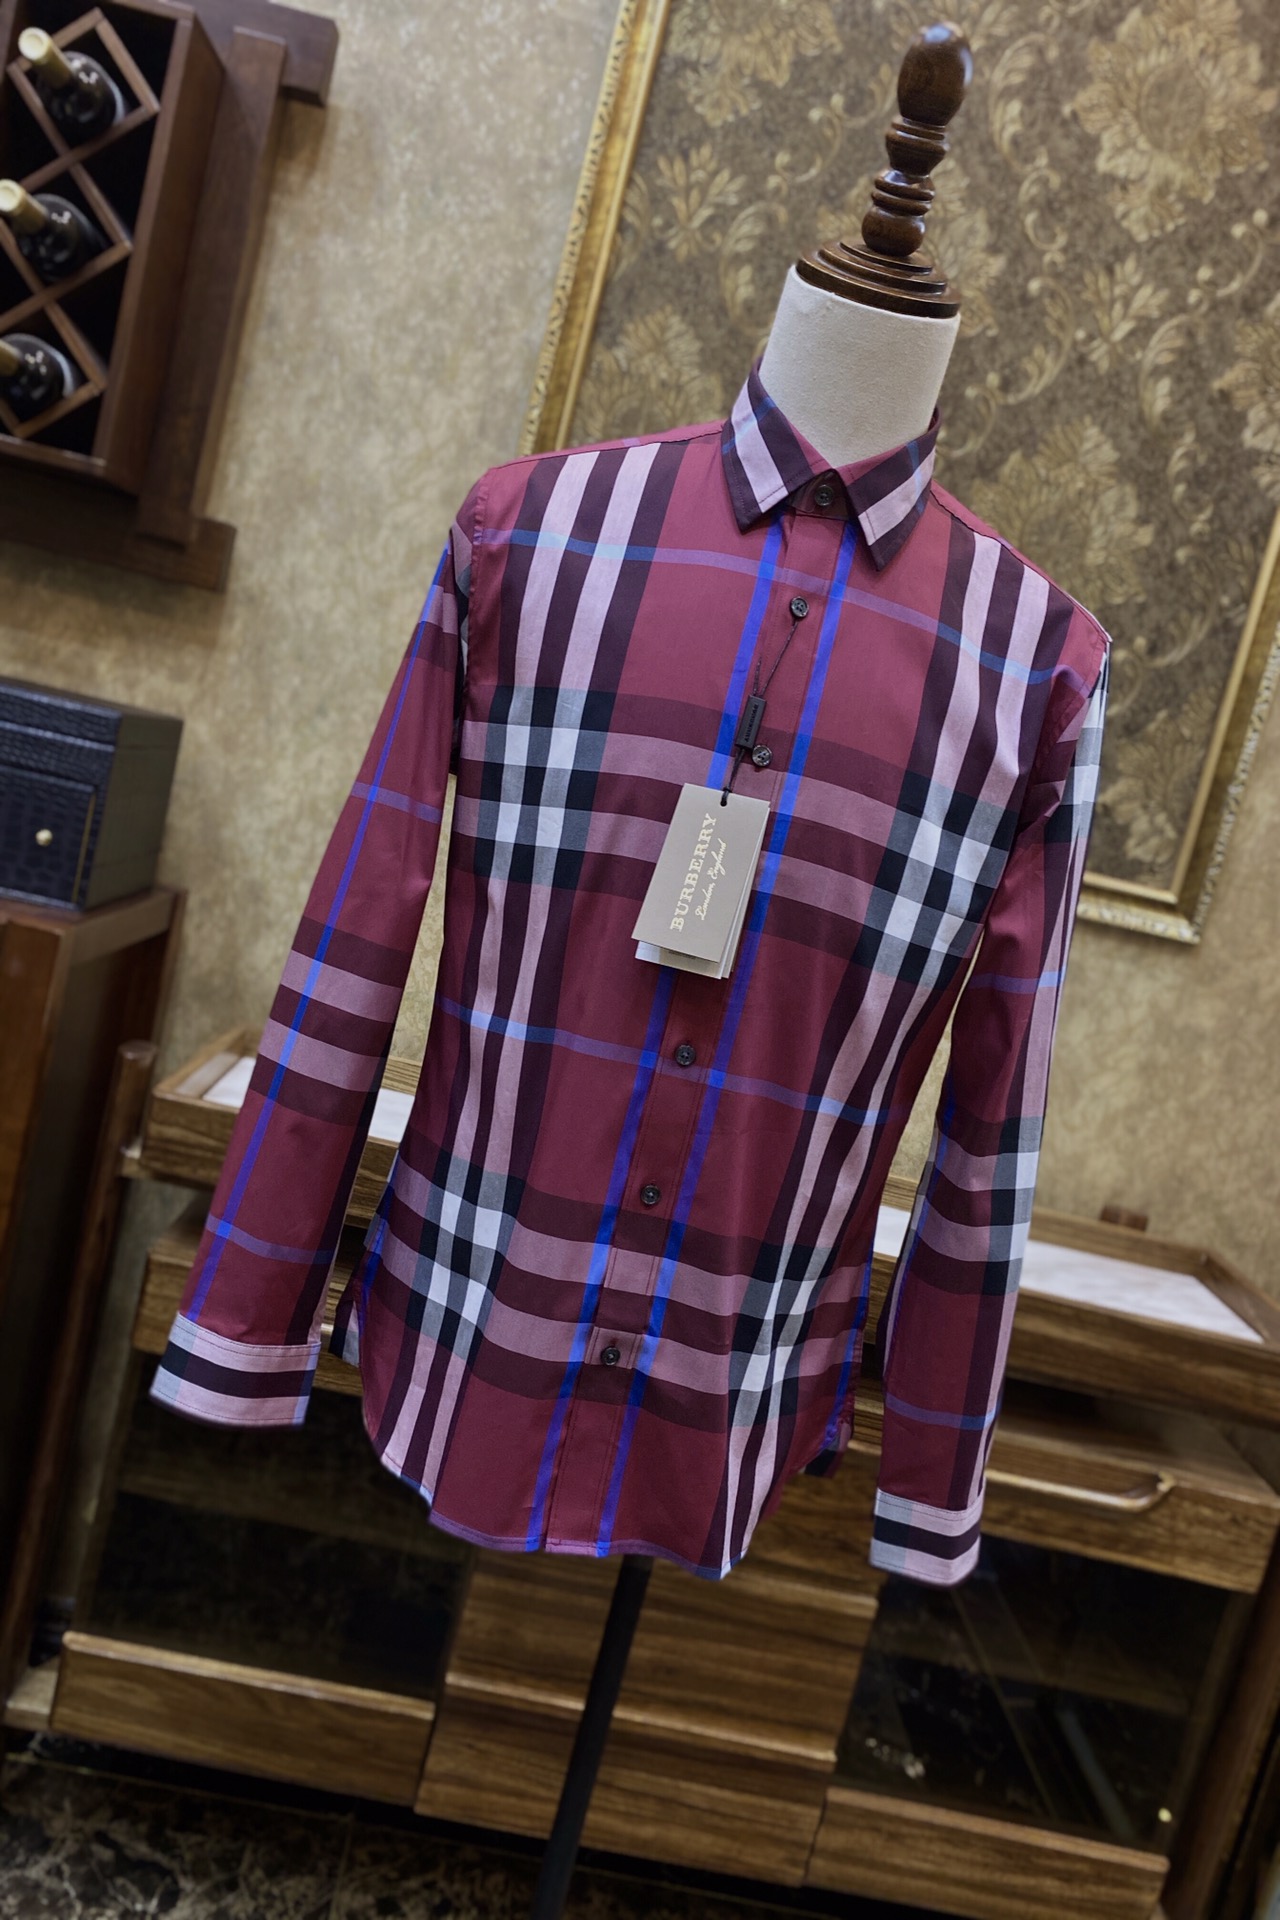 Burberry Clothing Shirts & Blouses High Quality Happy Copy
 Casual